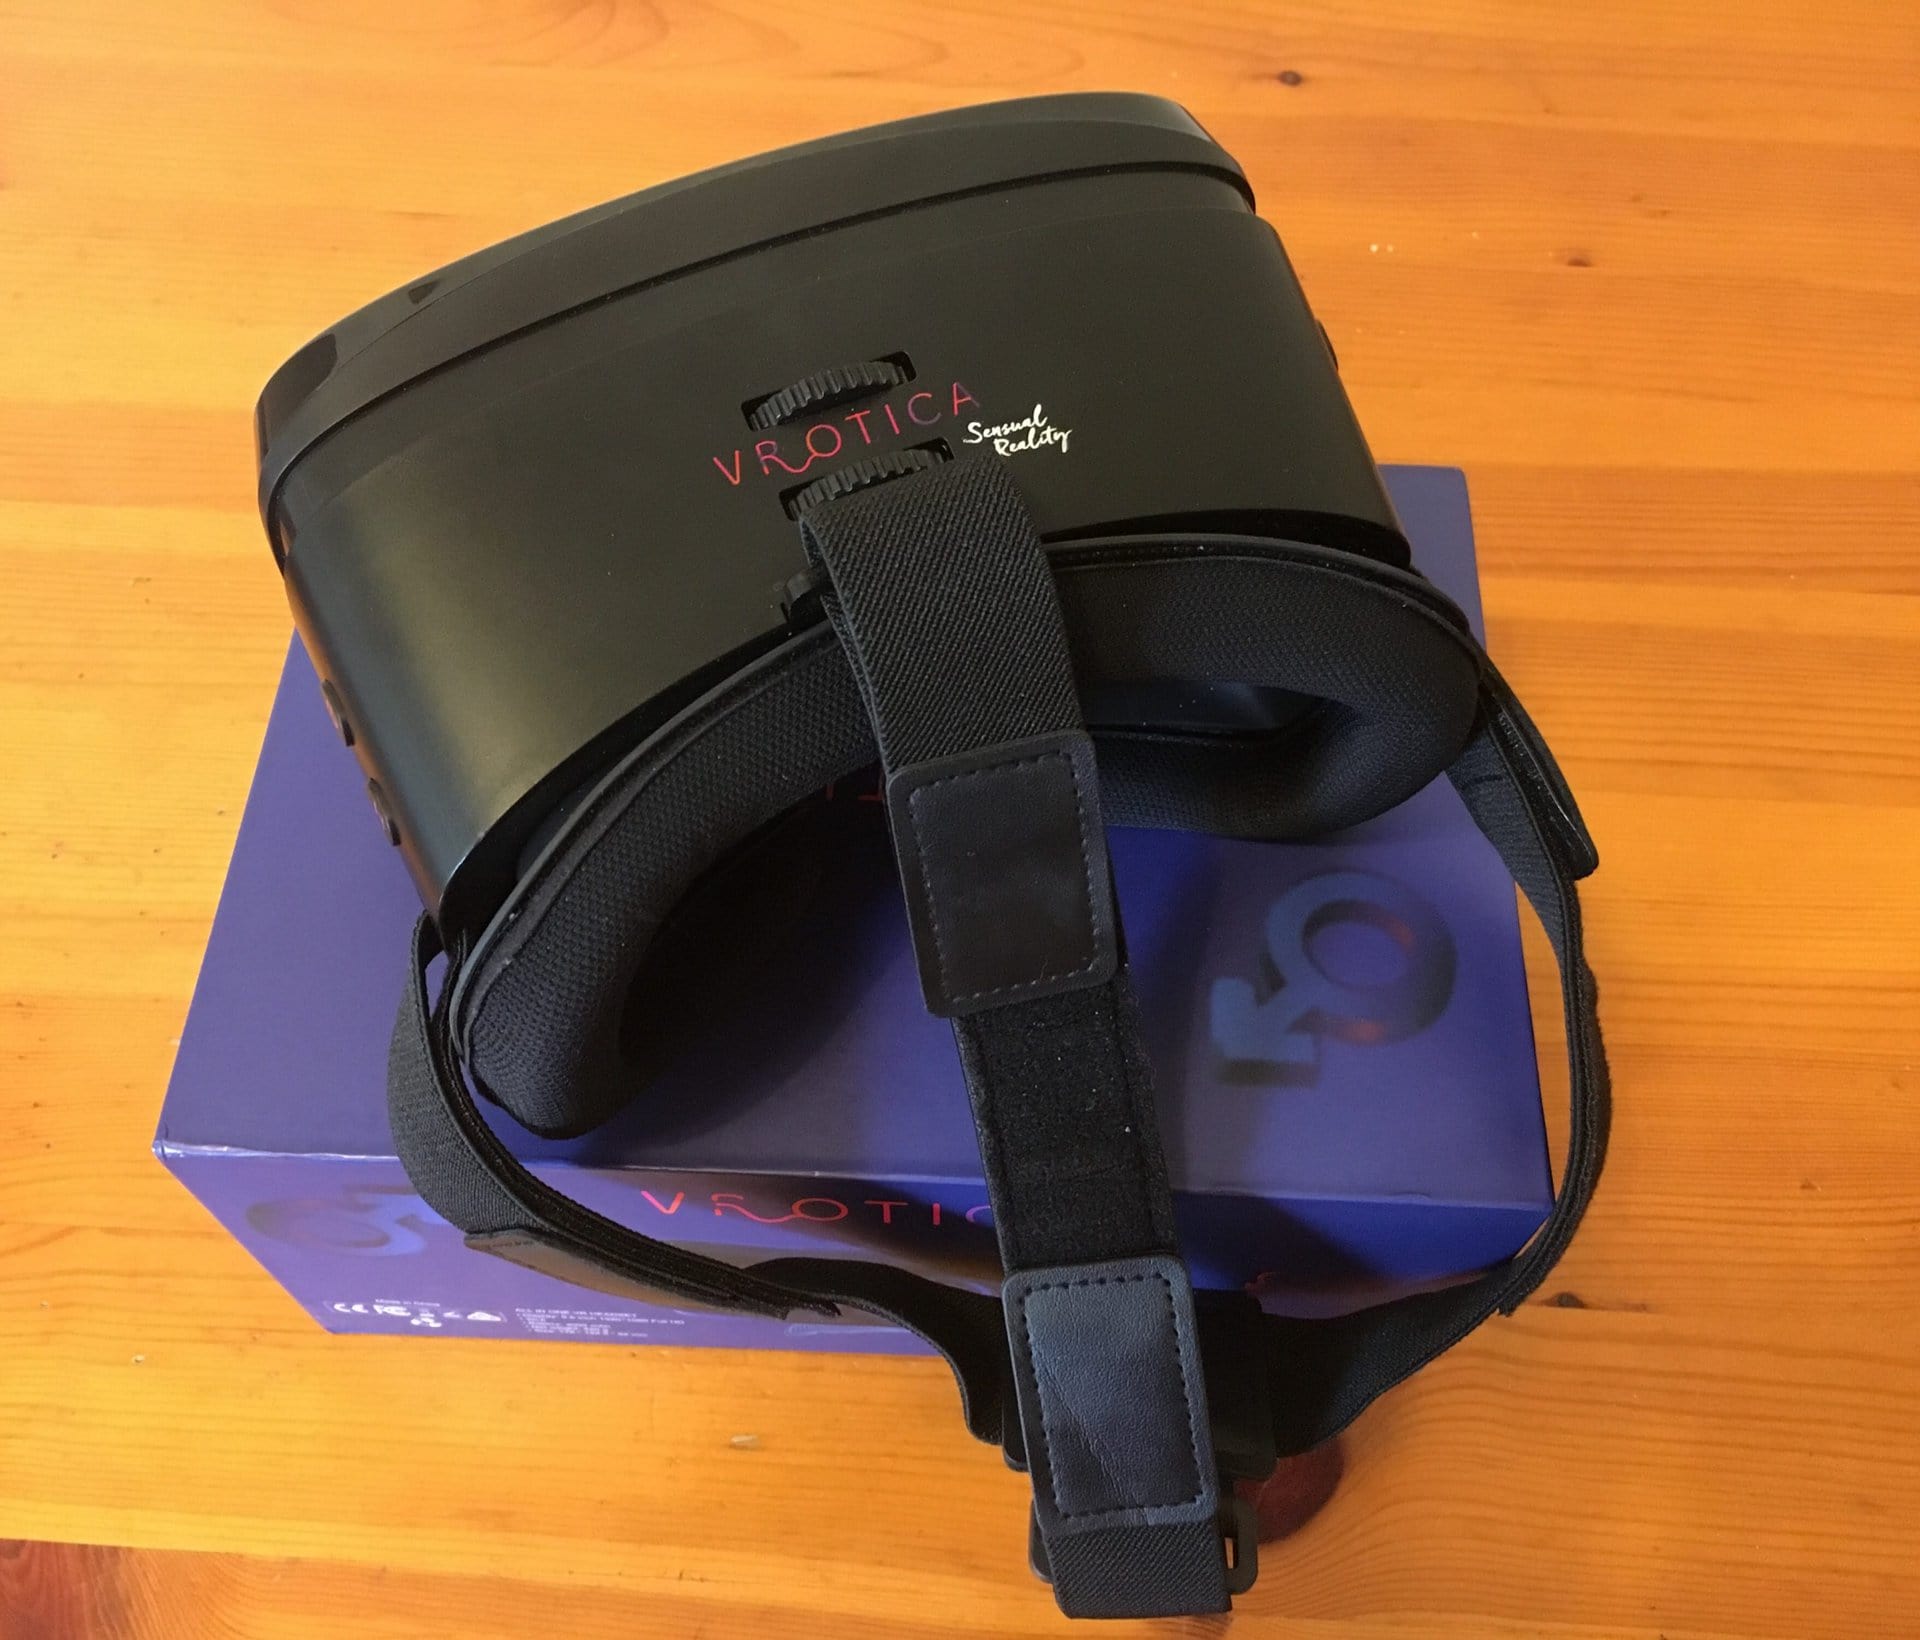 A black VR headset sitting on top of a box while being used for a VRotica review.